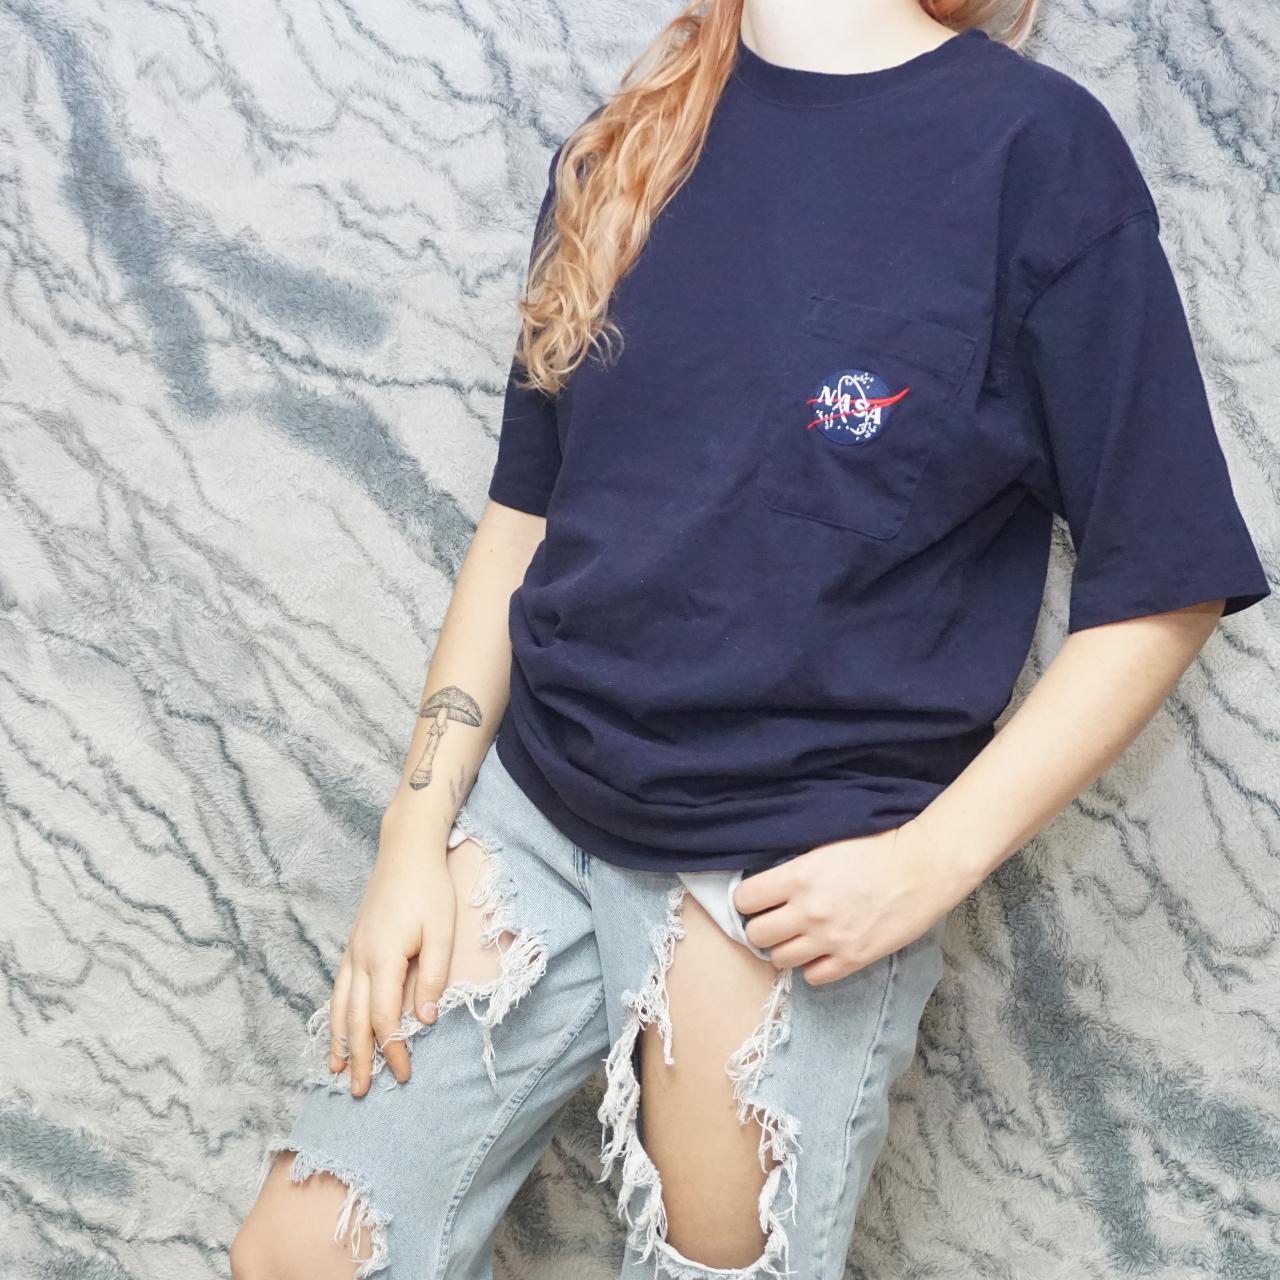 Product Image 3 - Embroidered NASA T
Size XXL

#NASA #Space